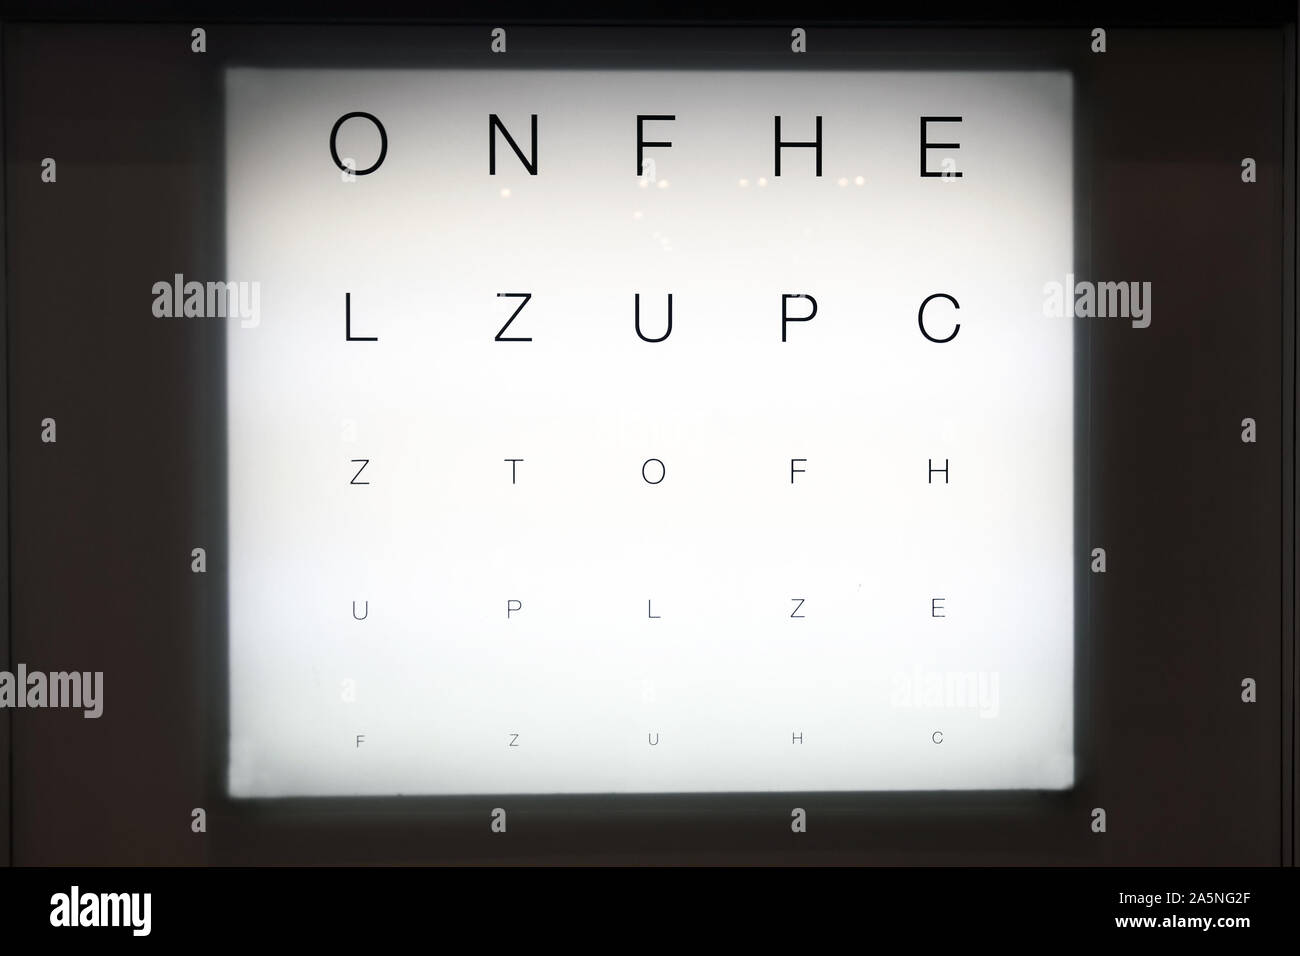 Real eye sight chart with letters in different sizes as method for vision testing Stock Photo